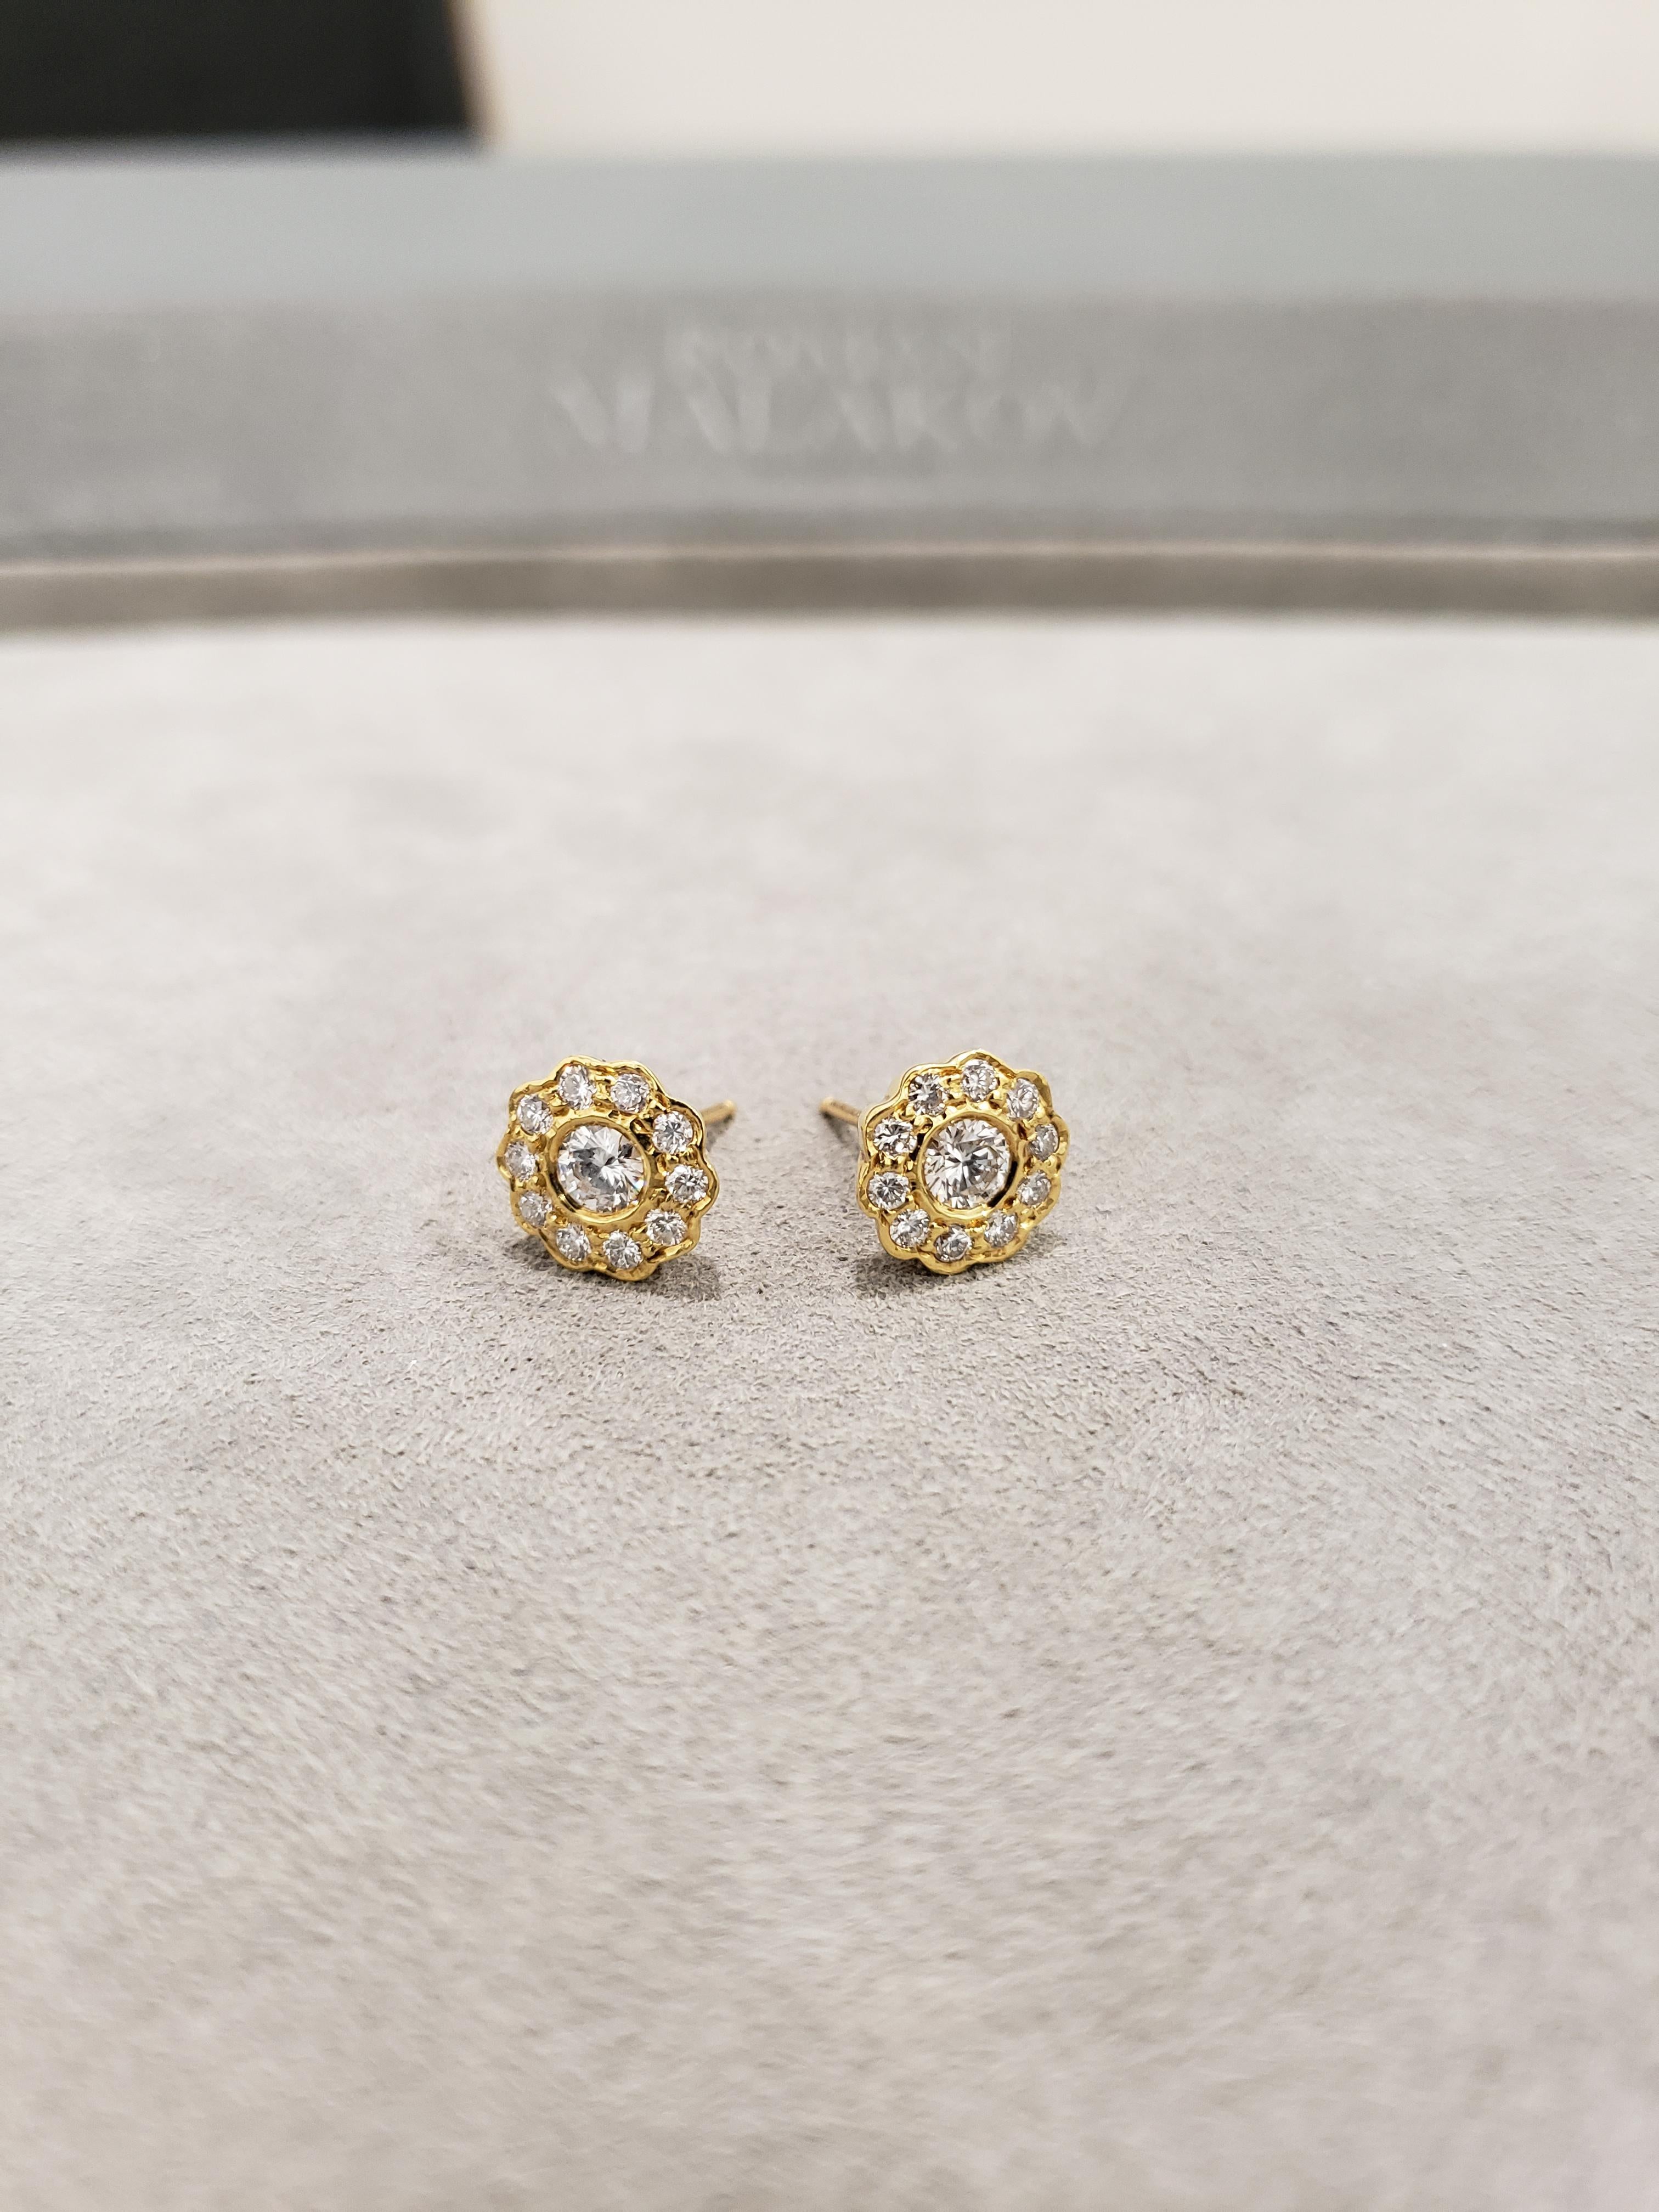 Each earring showcases a round brilliant diamond, surrounded by smaller round brilliant diamonds. Set in 18 karat yellow gold. Diamonds weigh 1.12 carats total.

Style available in different price ranges. Prices are based on your selection of the